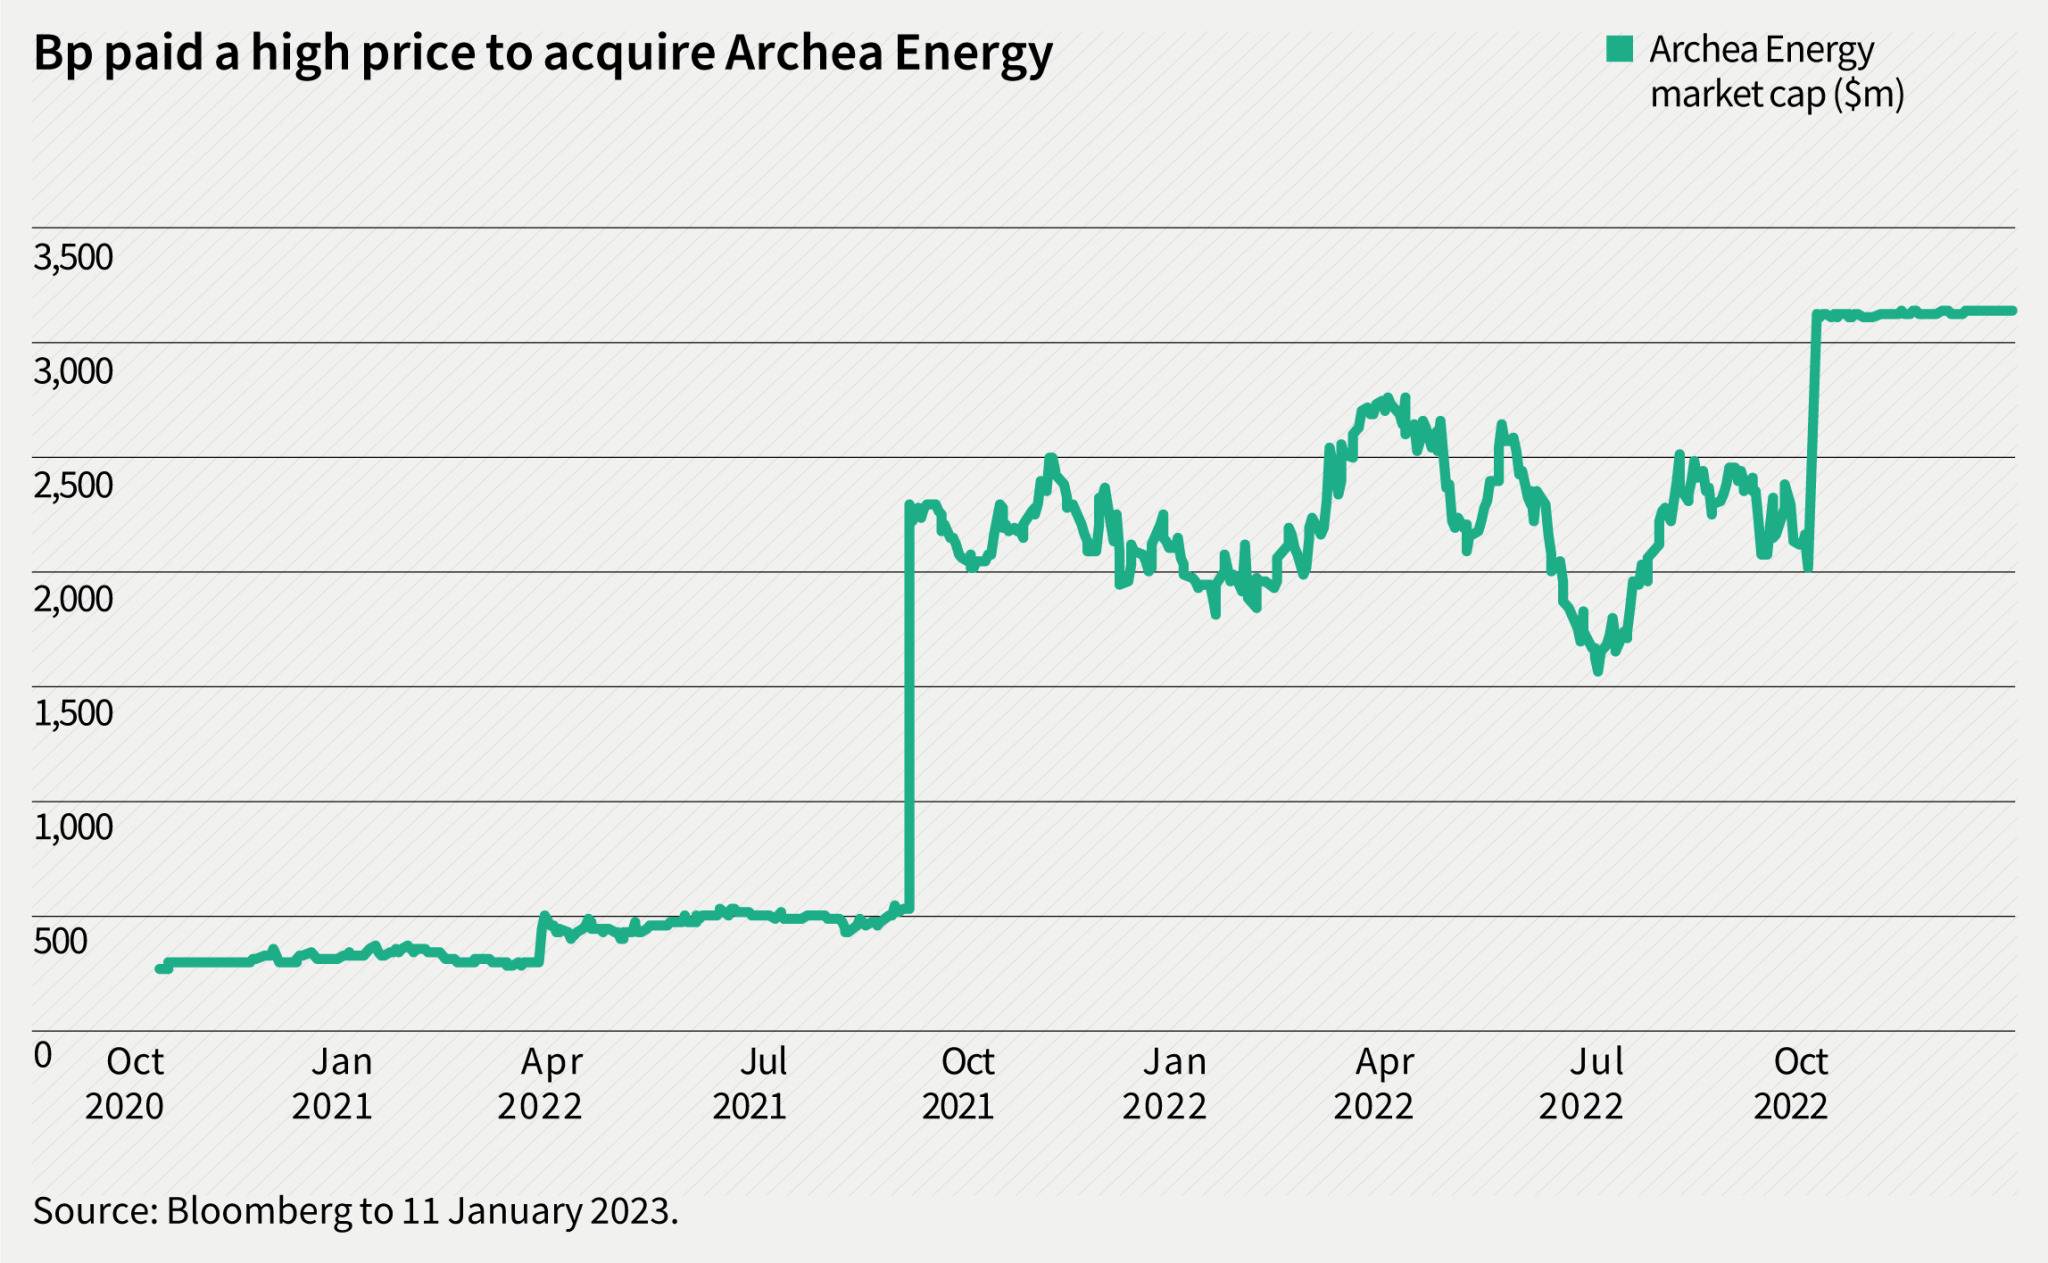 Bp paid a high price to acquire Archea Energy